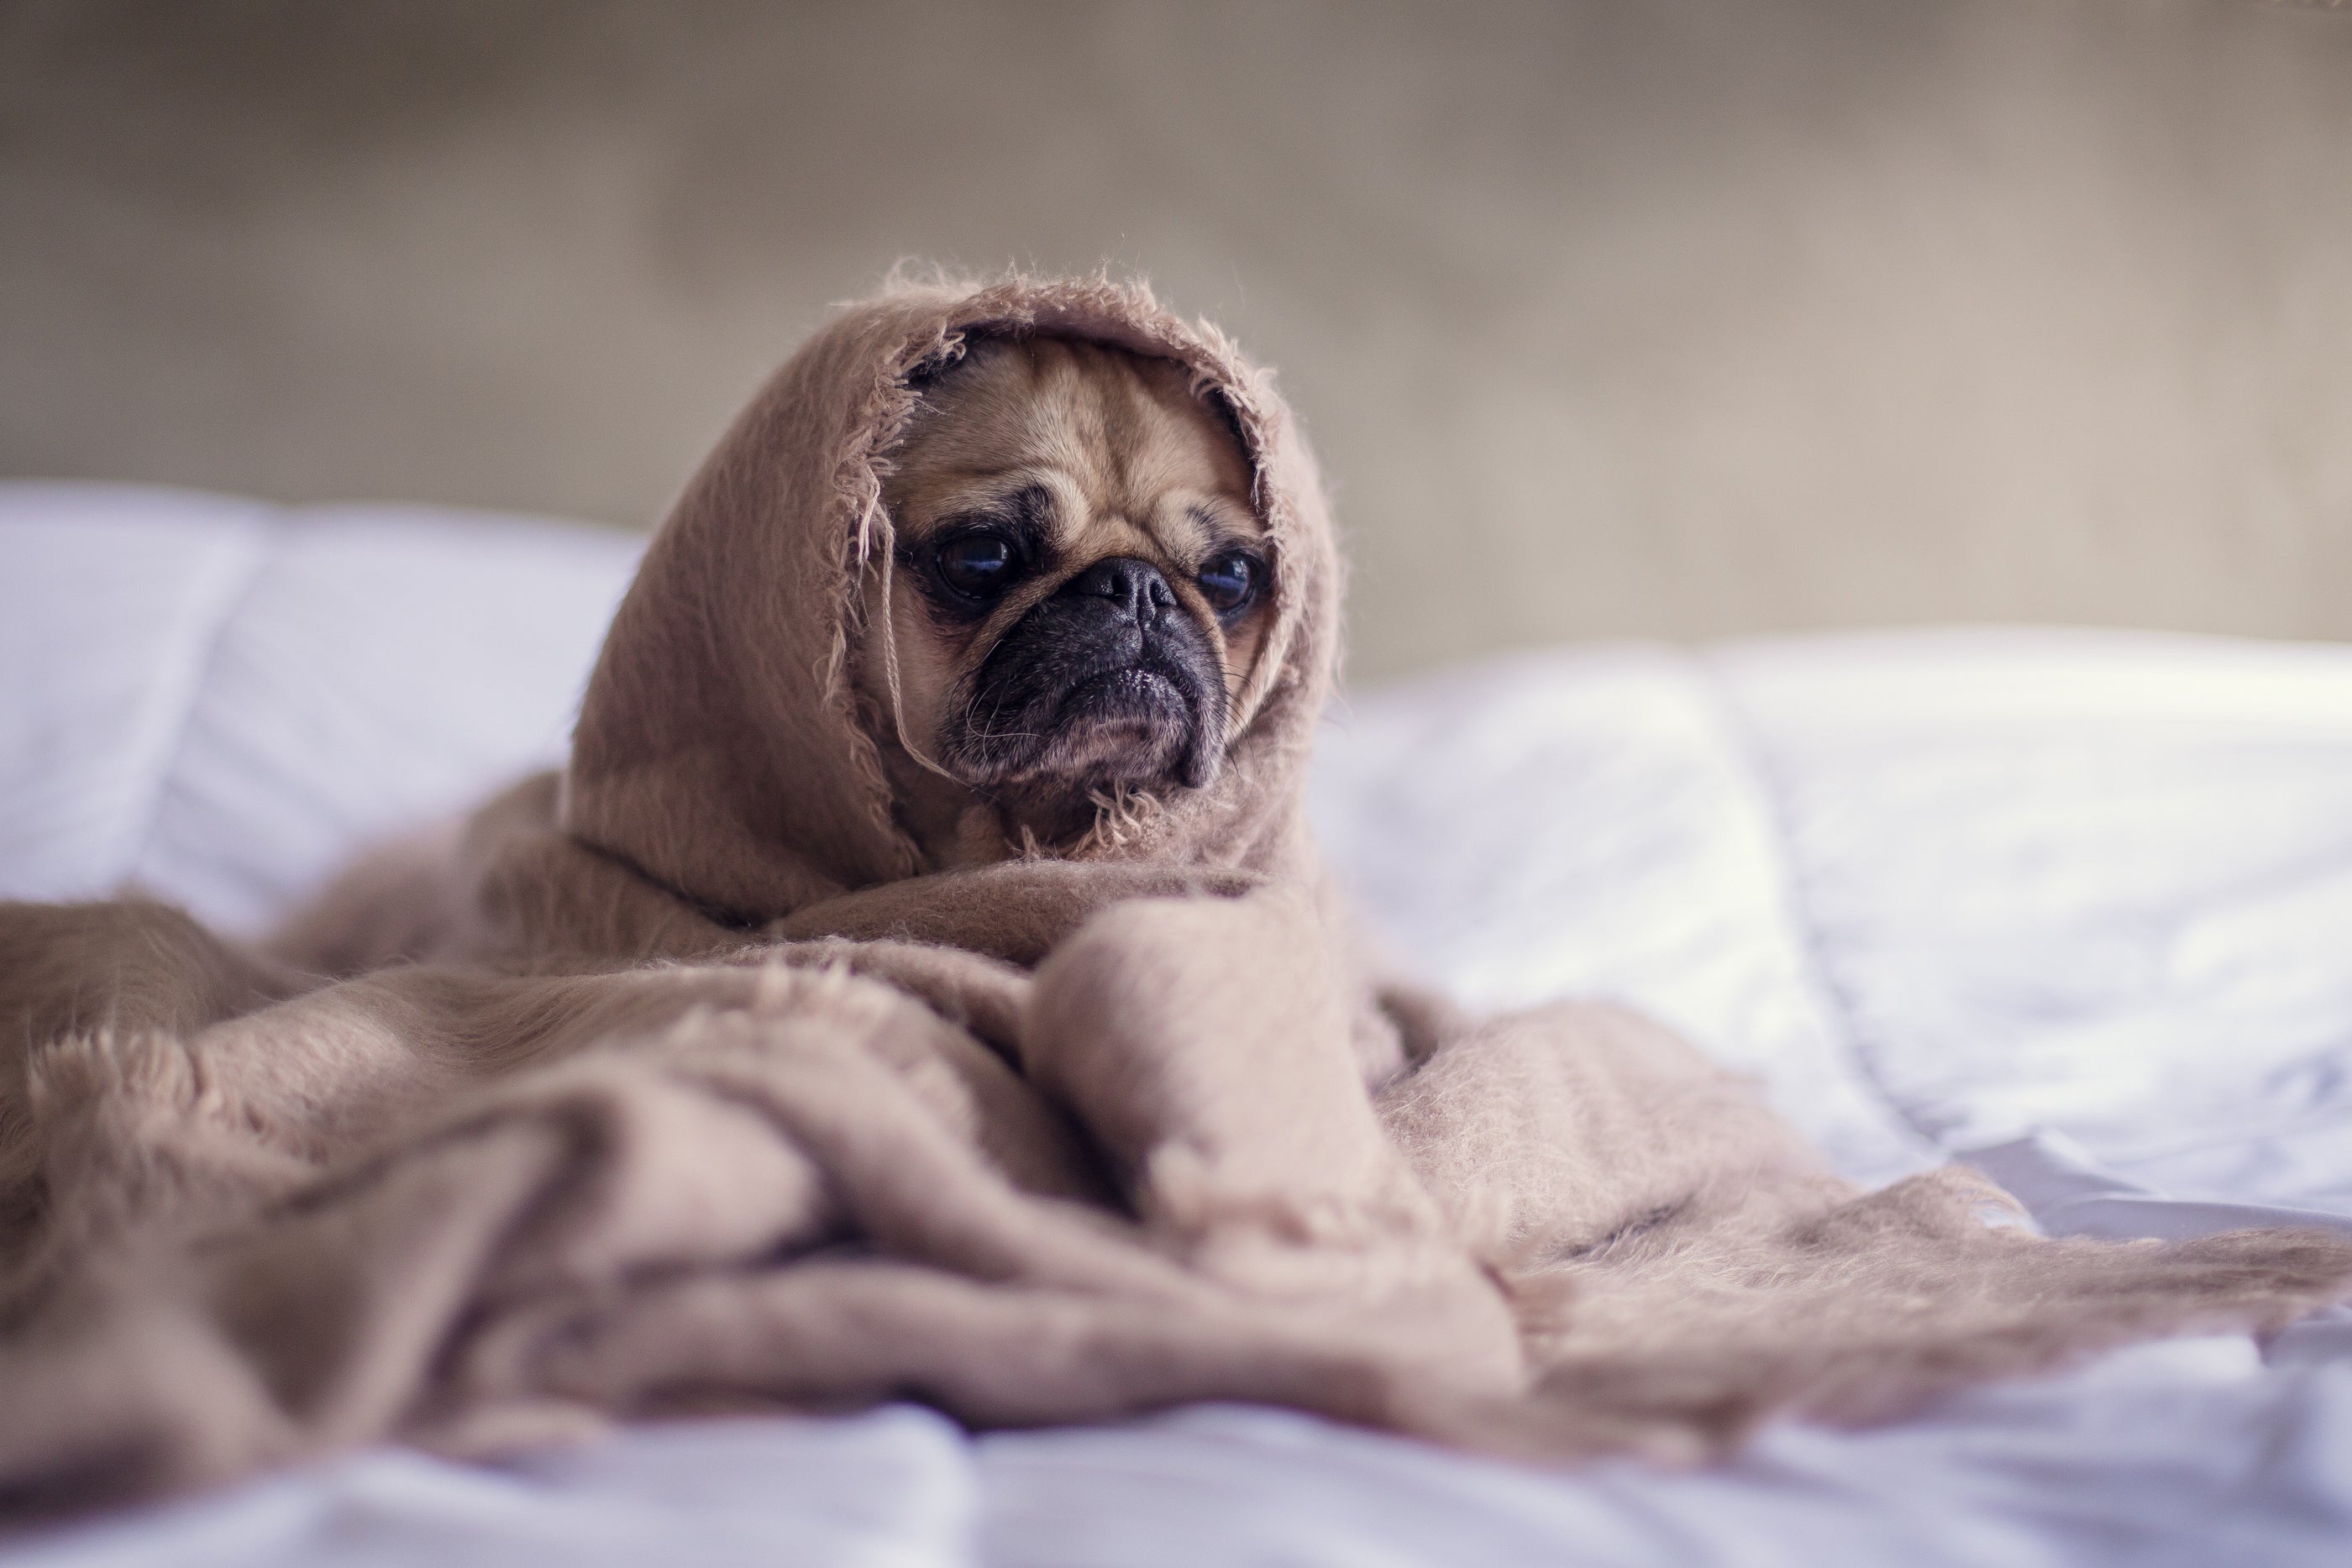 Pug dog wrapped in a blanket